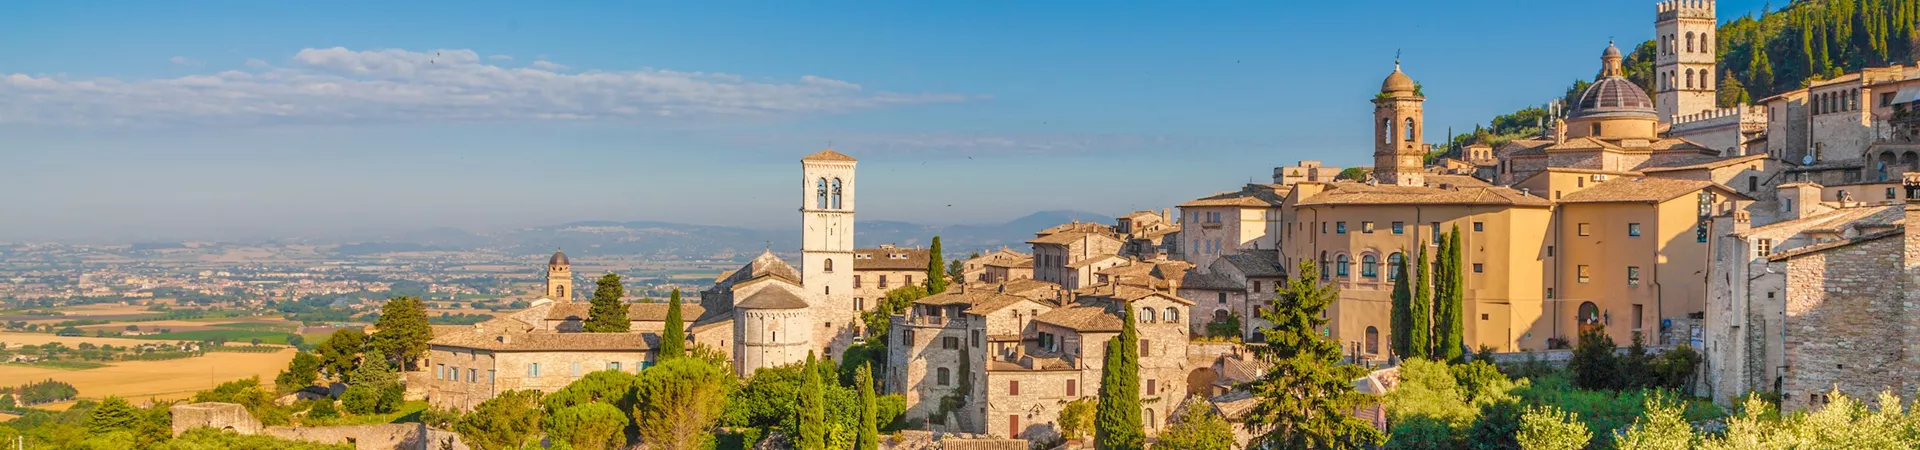 Townscape Assisi Italy 10